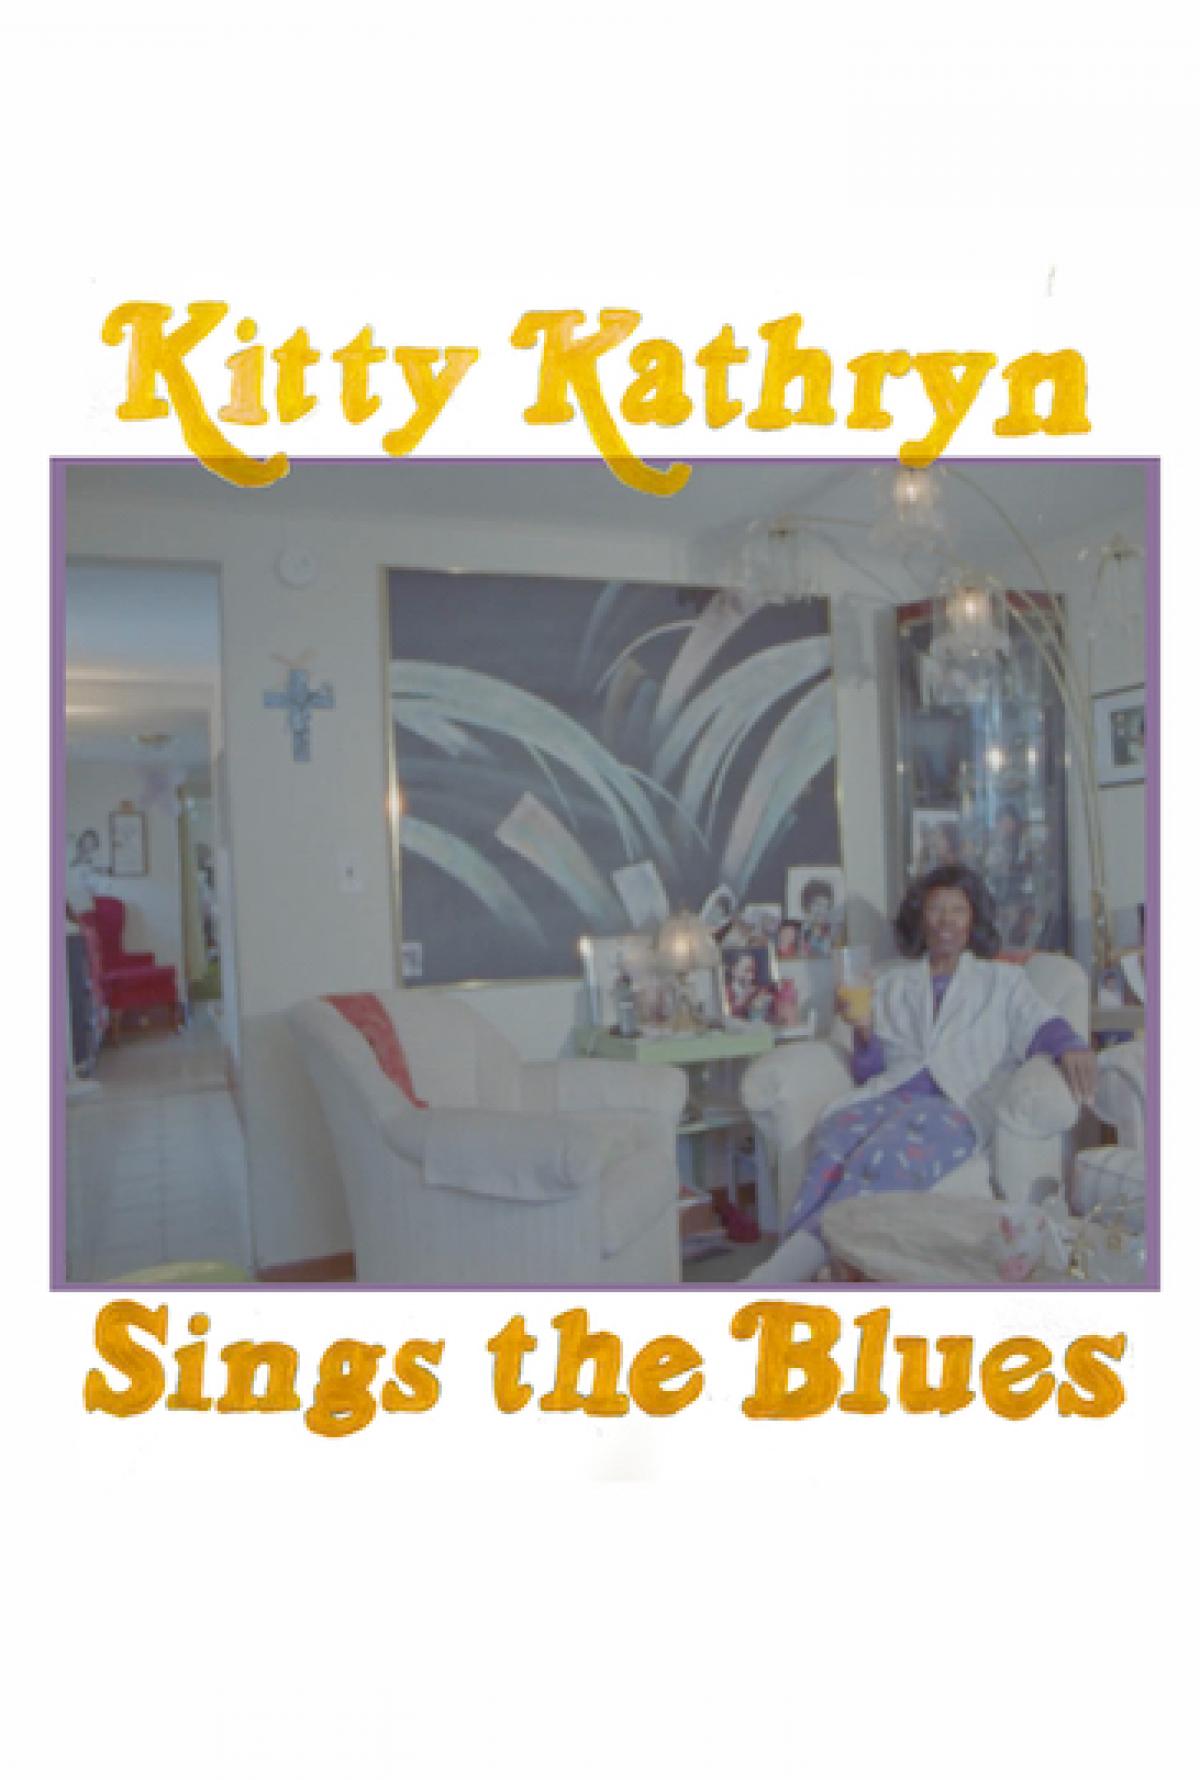 Kitty Kathryn Sings the Blues picture